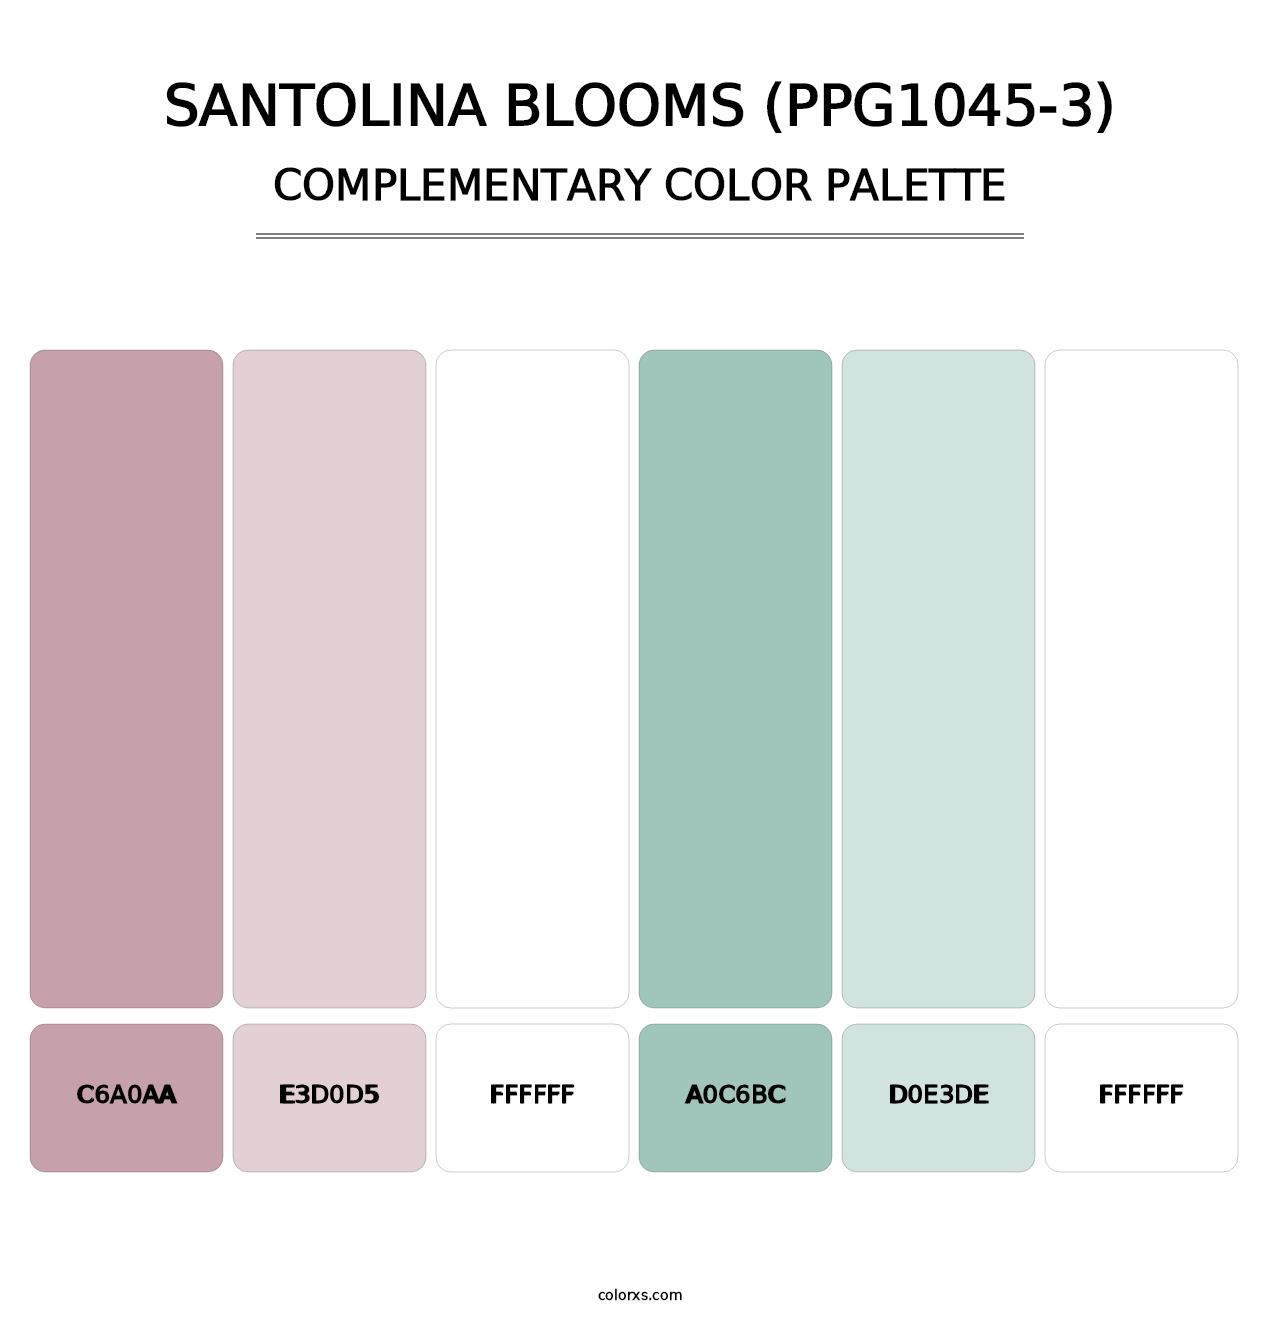 Santolina Blooms (PPG1045-3) - Complementary Color Palette